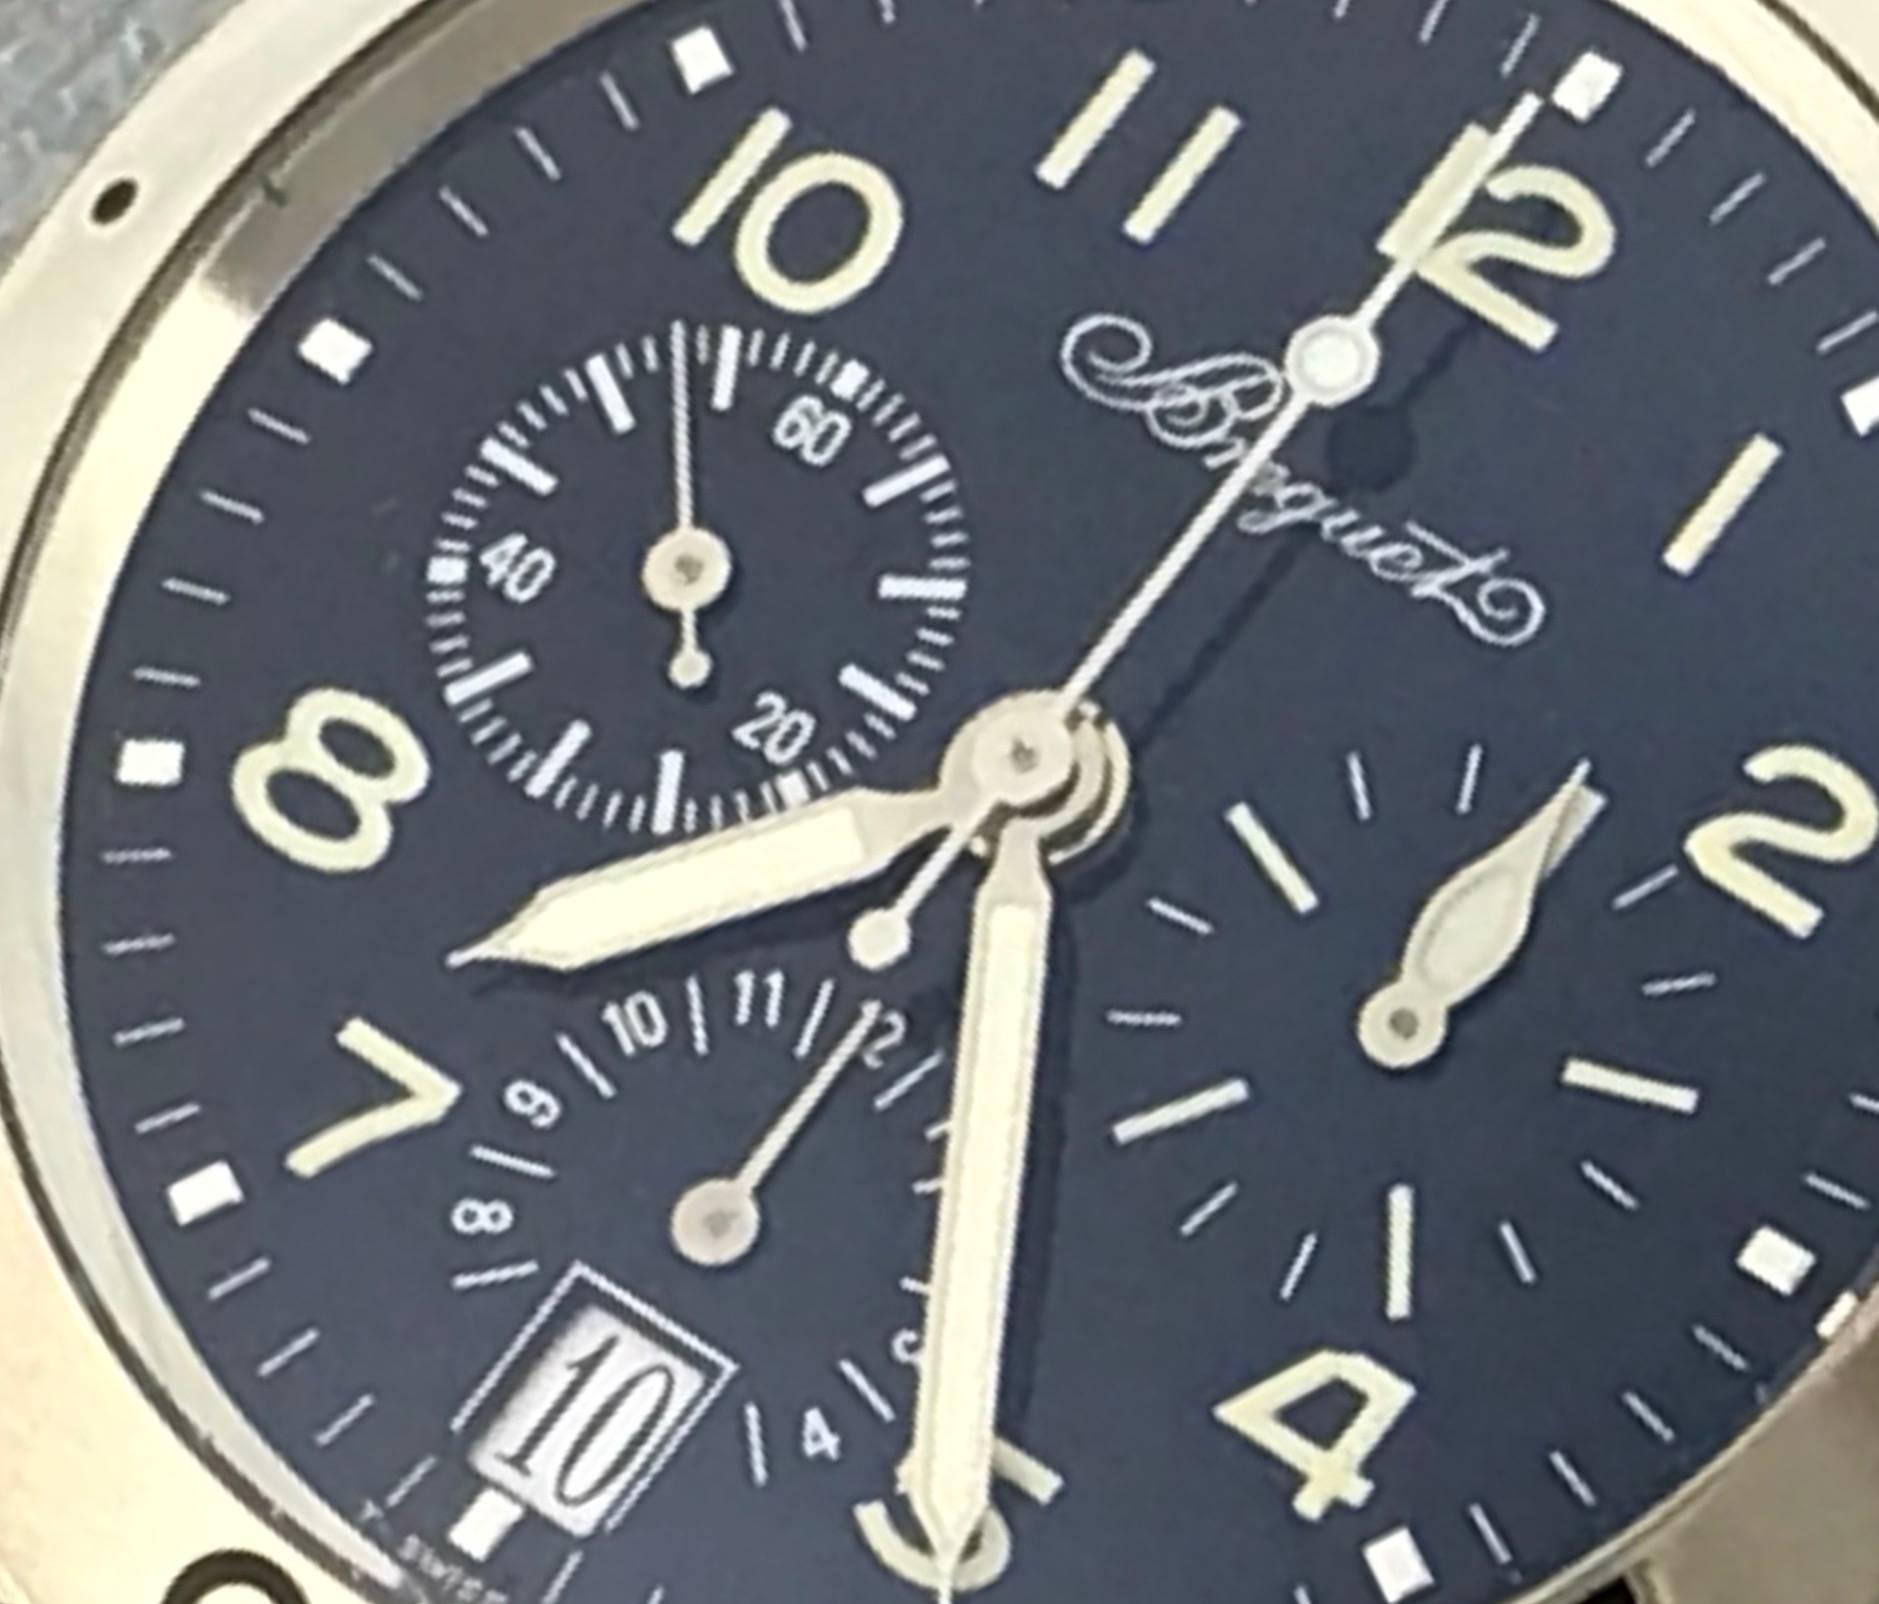 Breguet Transatlantic Chronograph Model 3820BB.B2.3W6 certified pre-owned men's automatic wrist watch.  Featuring a dark blue dial with luminous arabic numerals encased in 18k white gold, screw down crown and measuring 39mm. Black strap with 18k